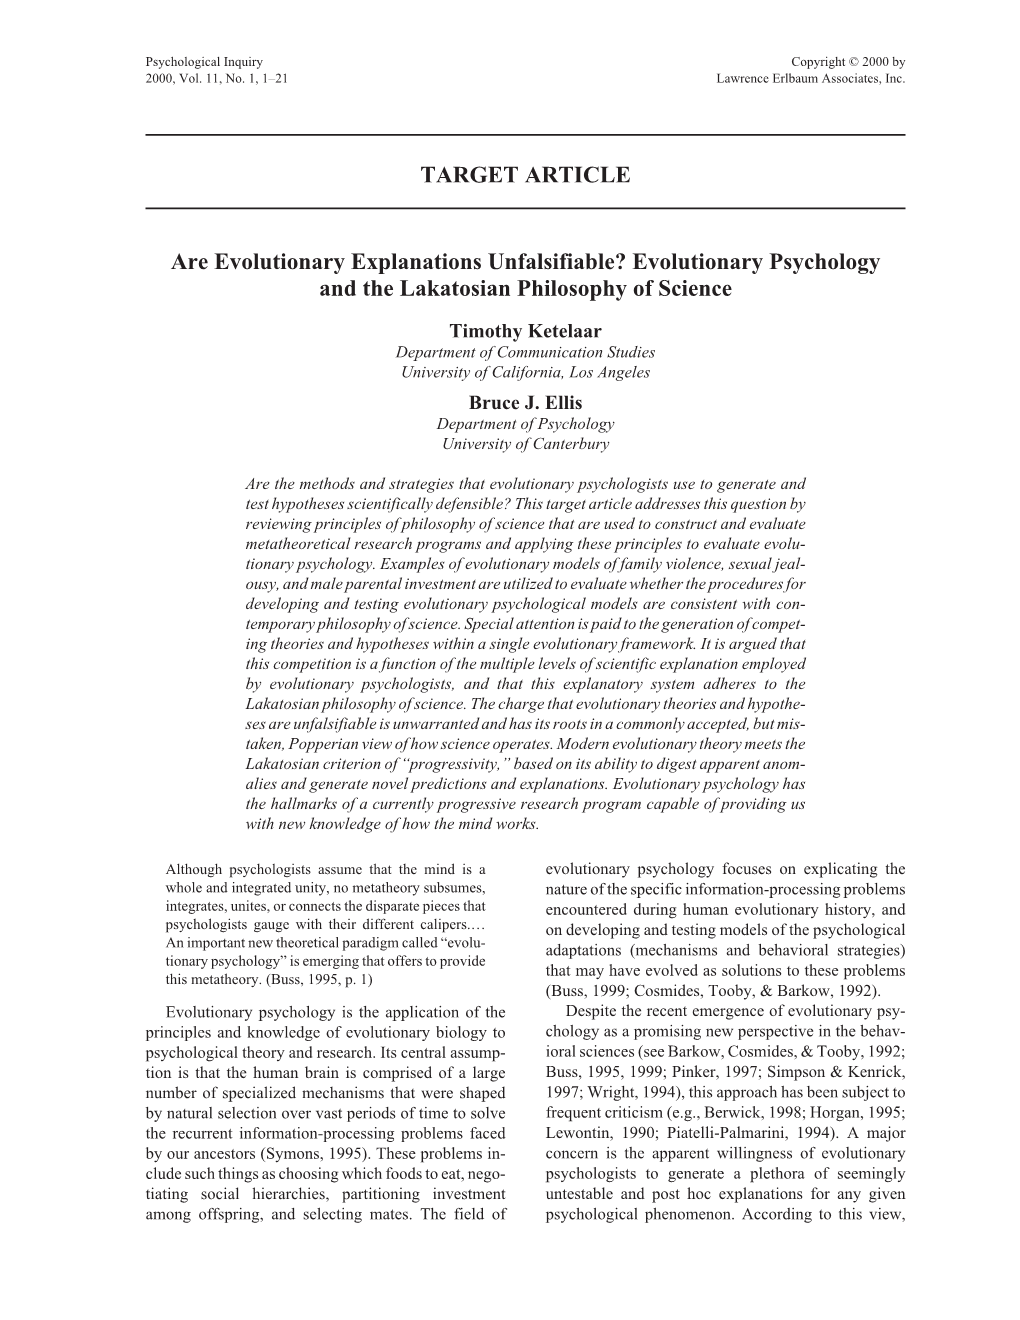 Evolutionary Psychology and the Lakatosian Philosophy of Science